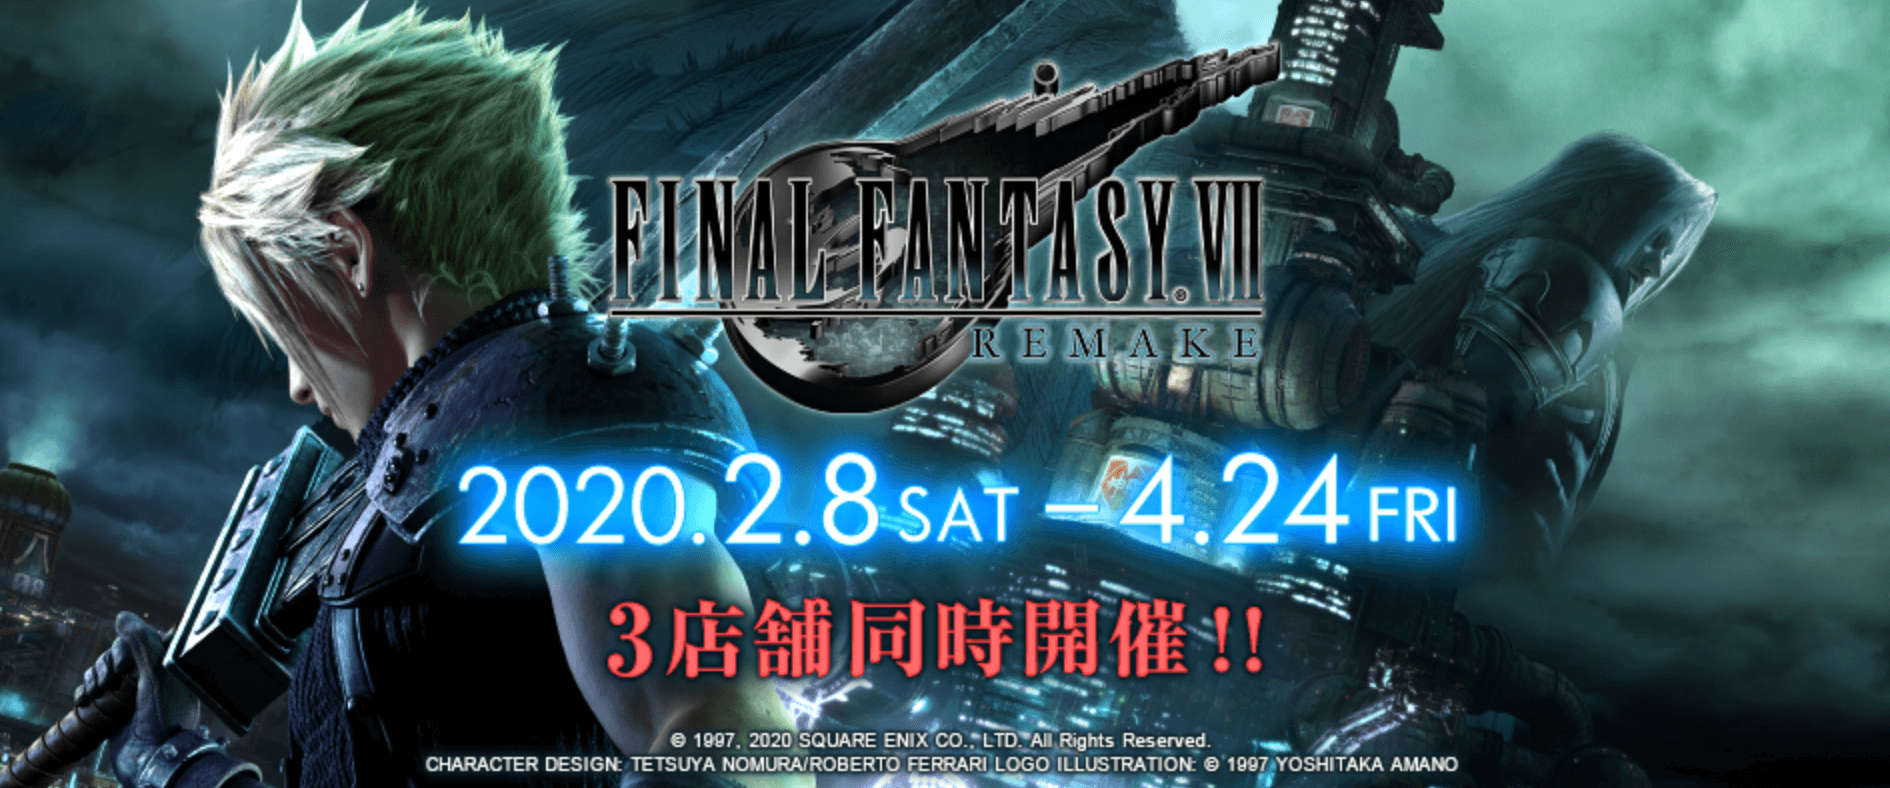 Final Fantasy Vii Remake Cafe Will Open In Tokyo And Osaka Japan Web Magazine